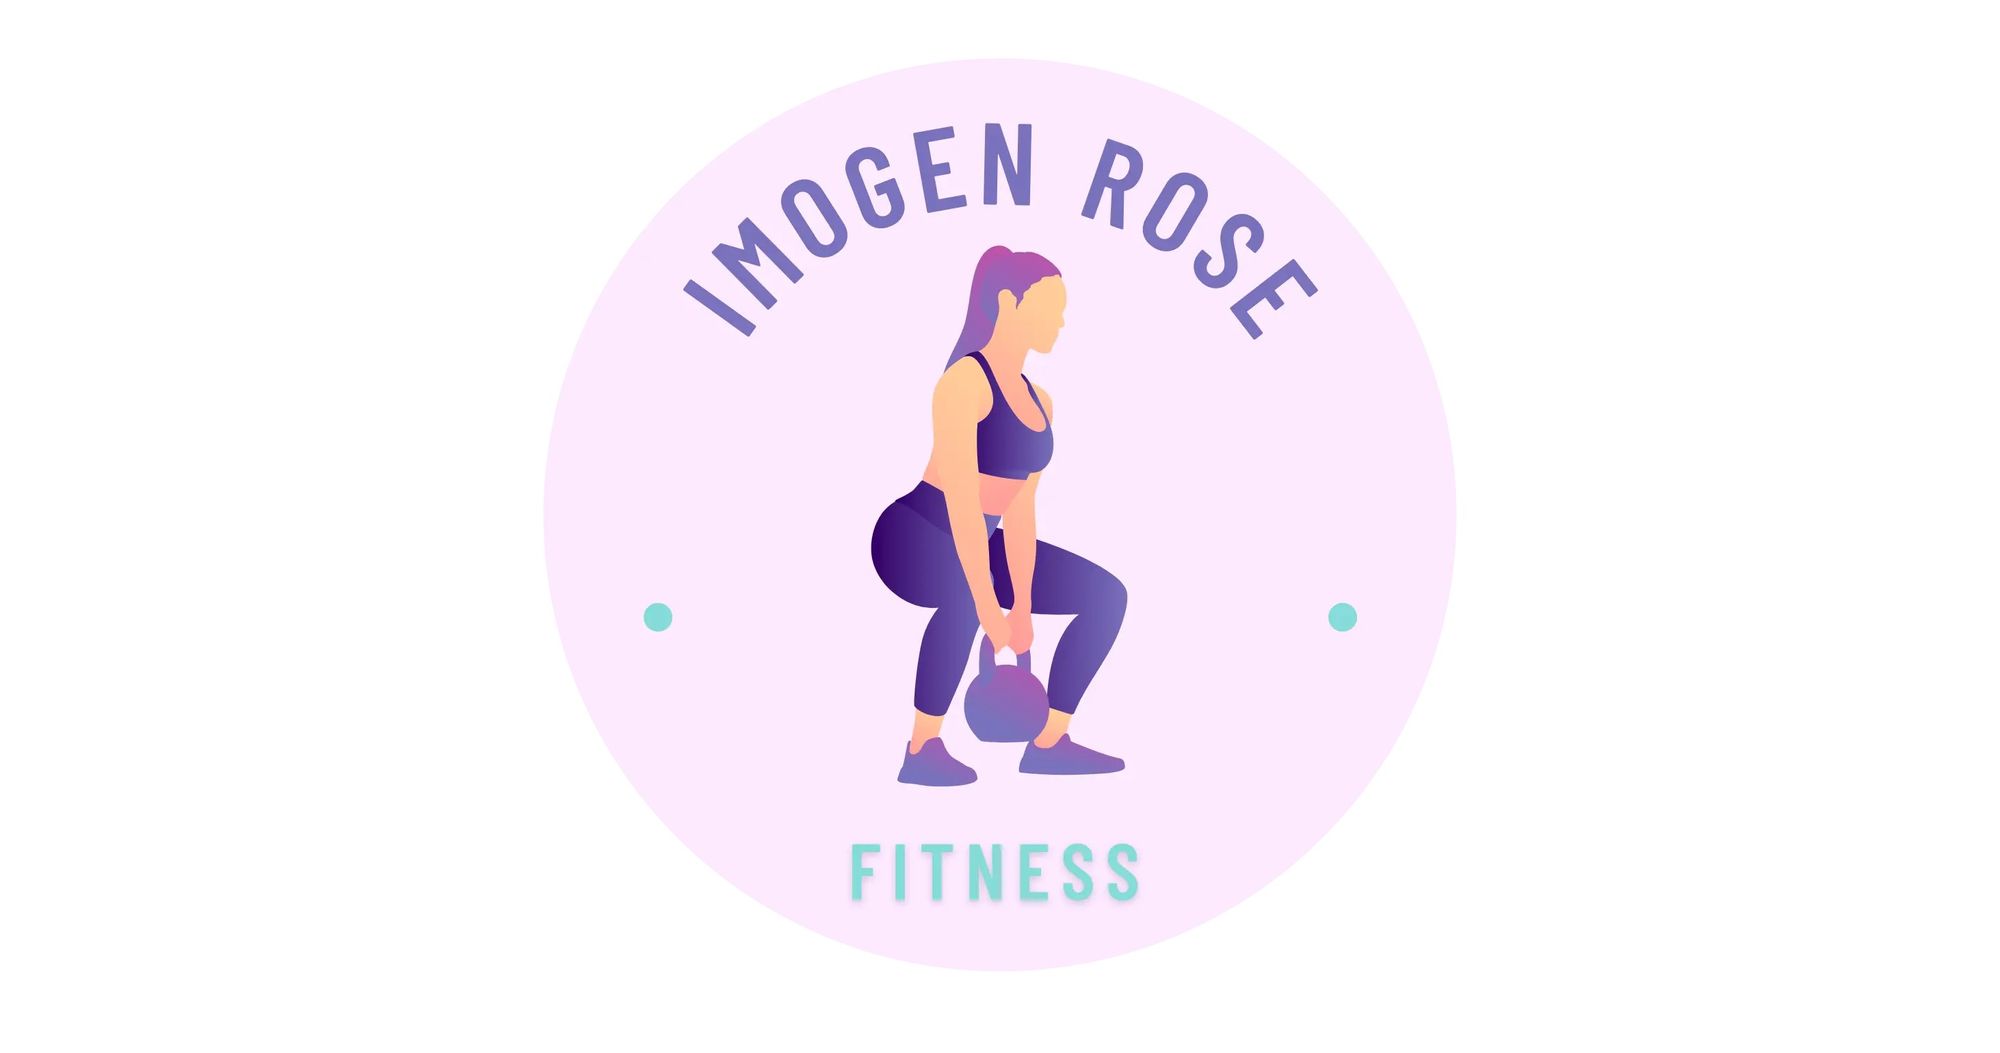 Reach Your Health and Fitness Goals - Imogen Rose Fitness